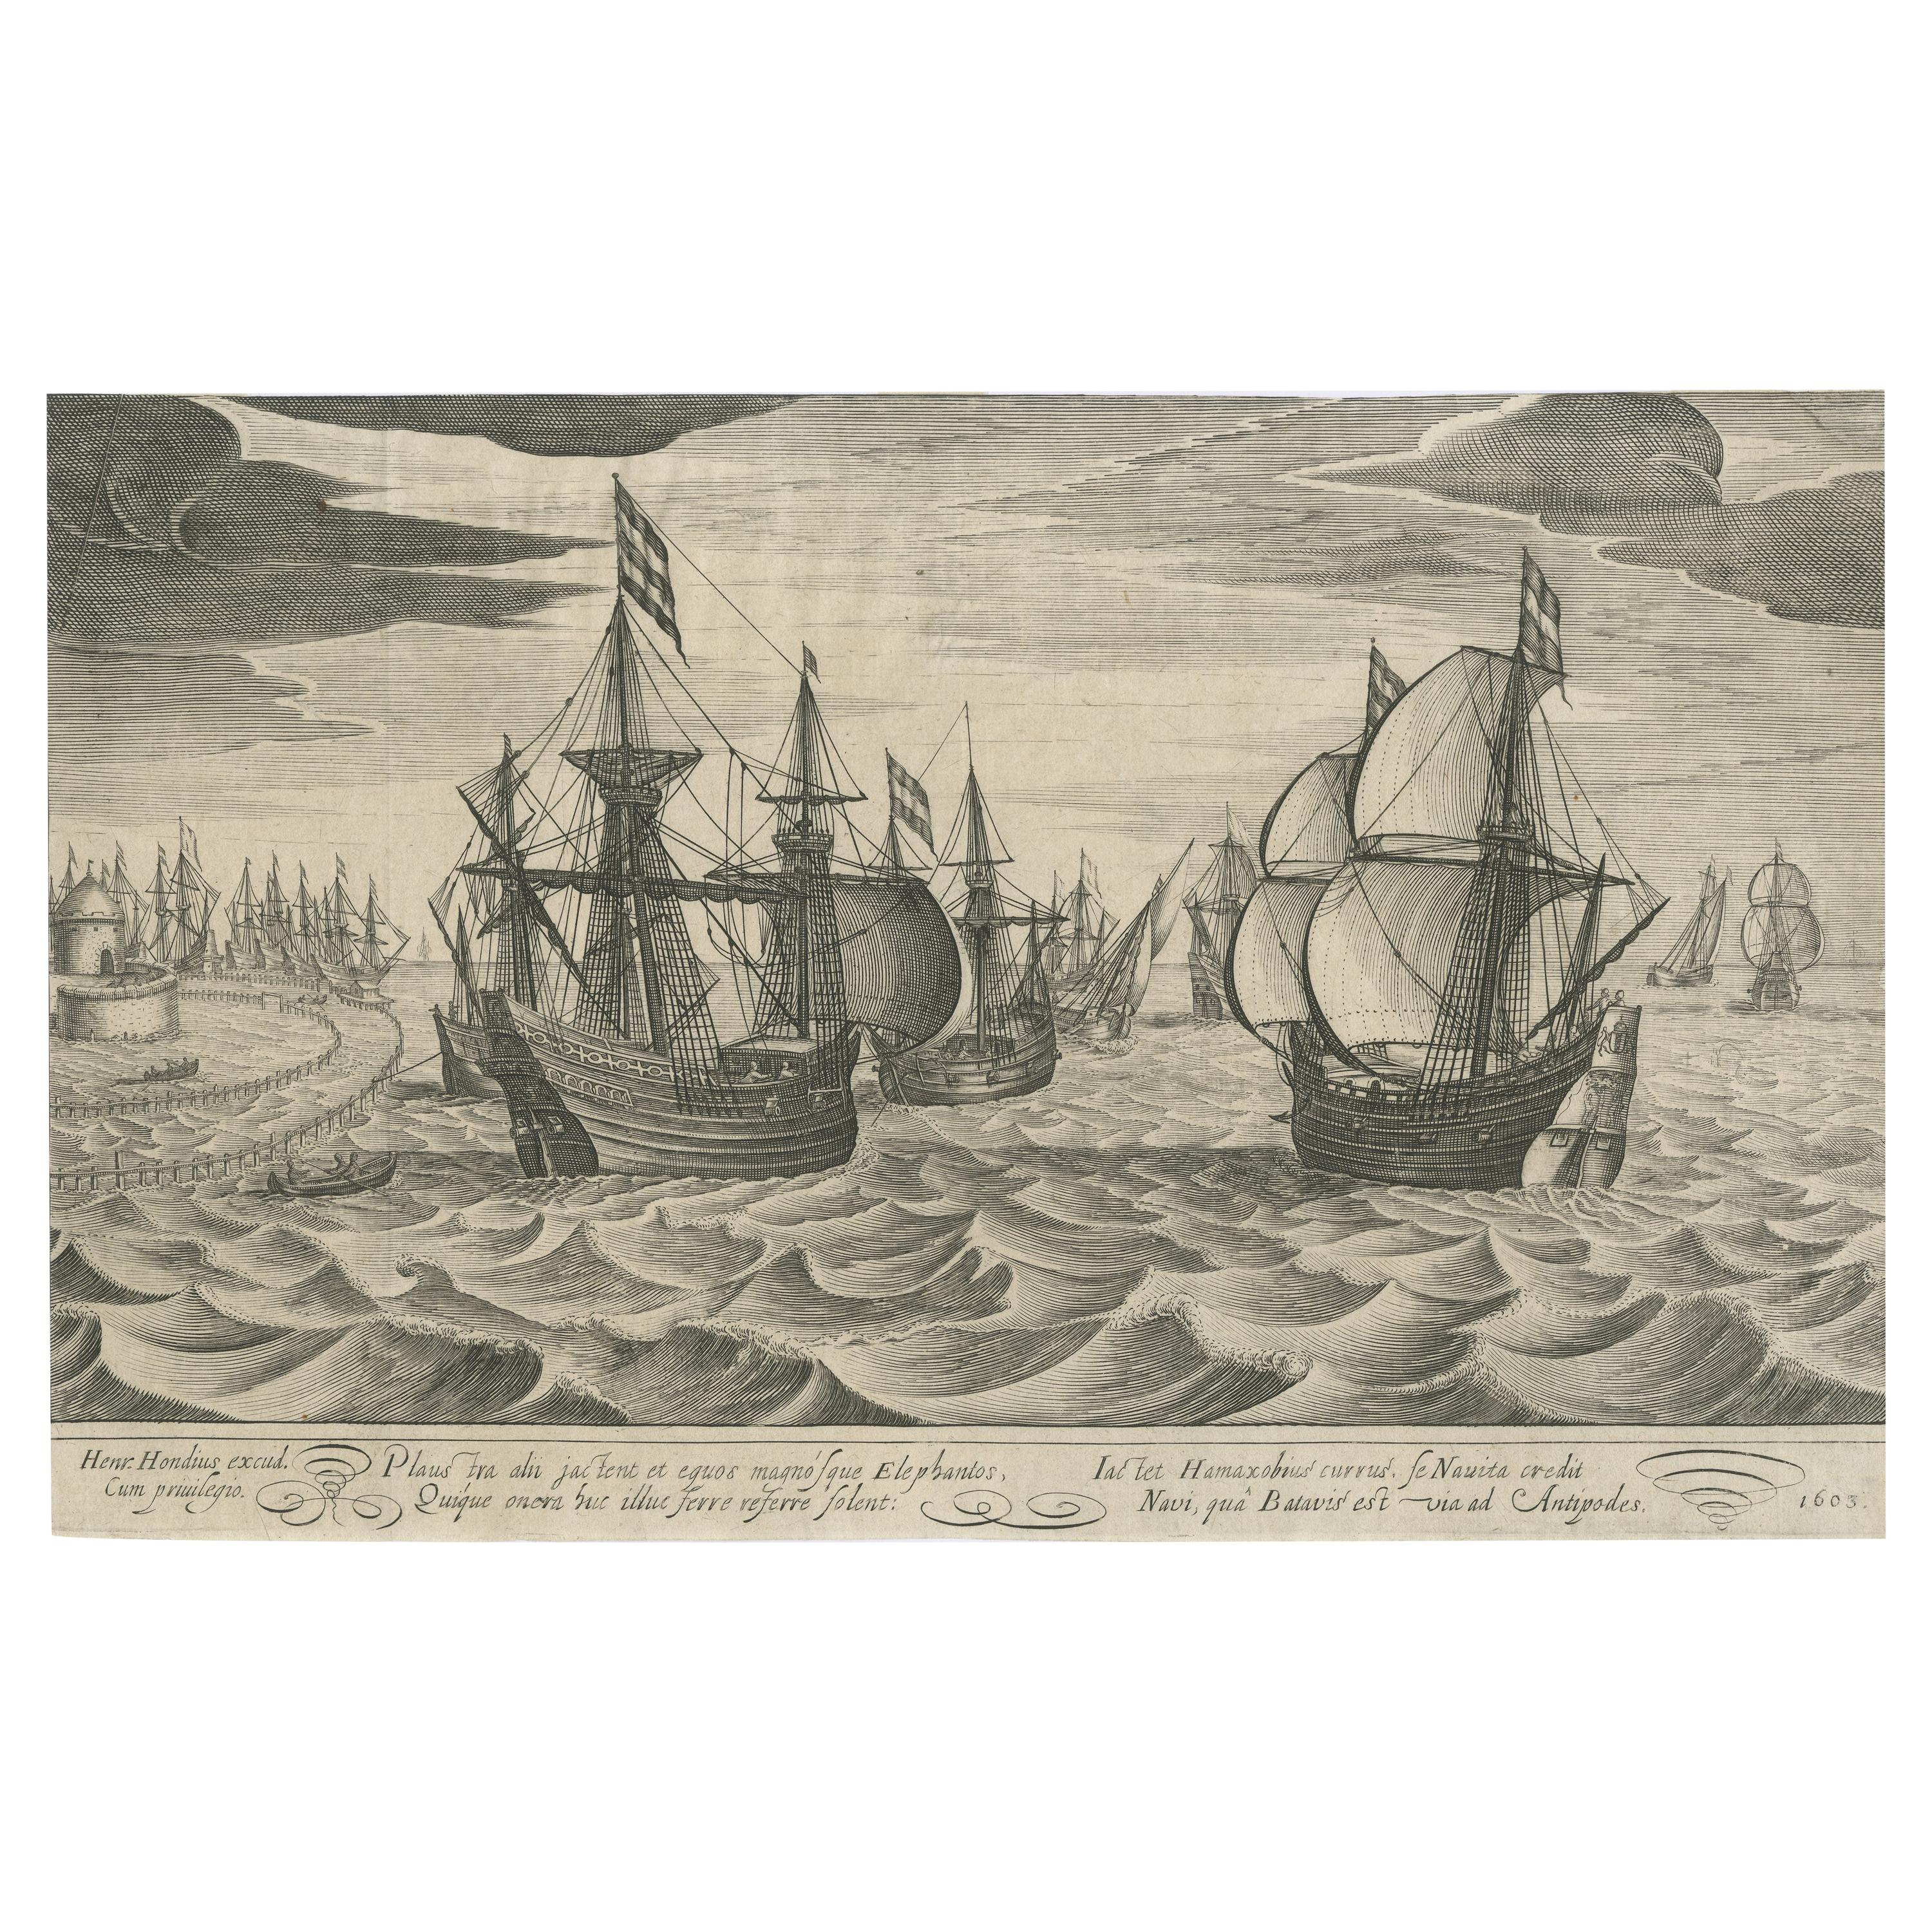 Antique Print of a Fleet of Nine Ships Departing to the East Indies '1603'